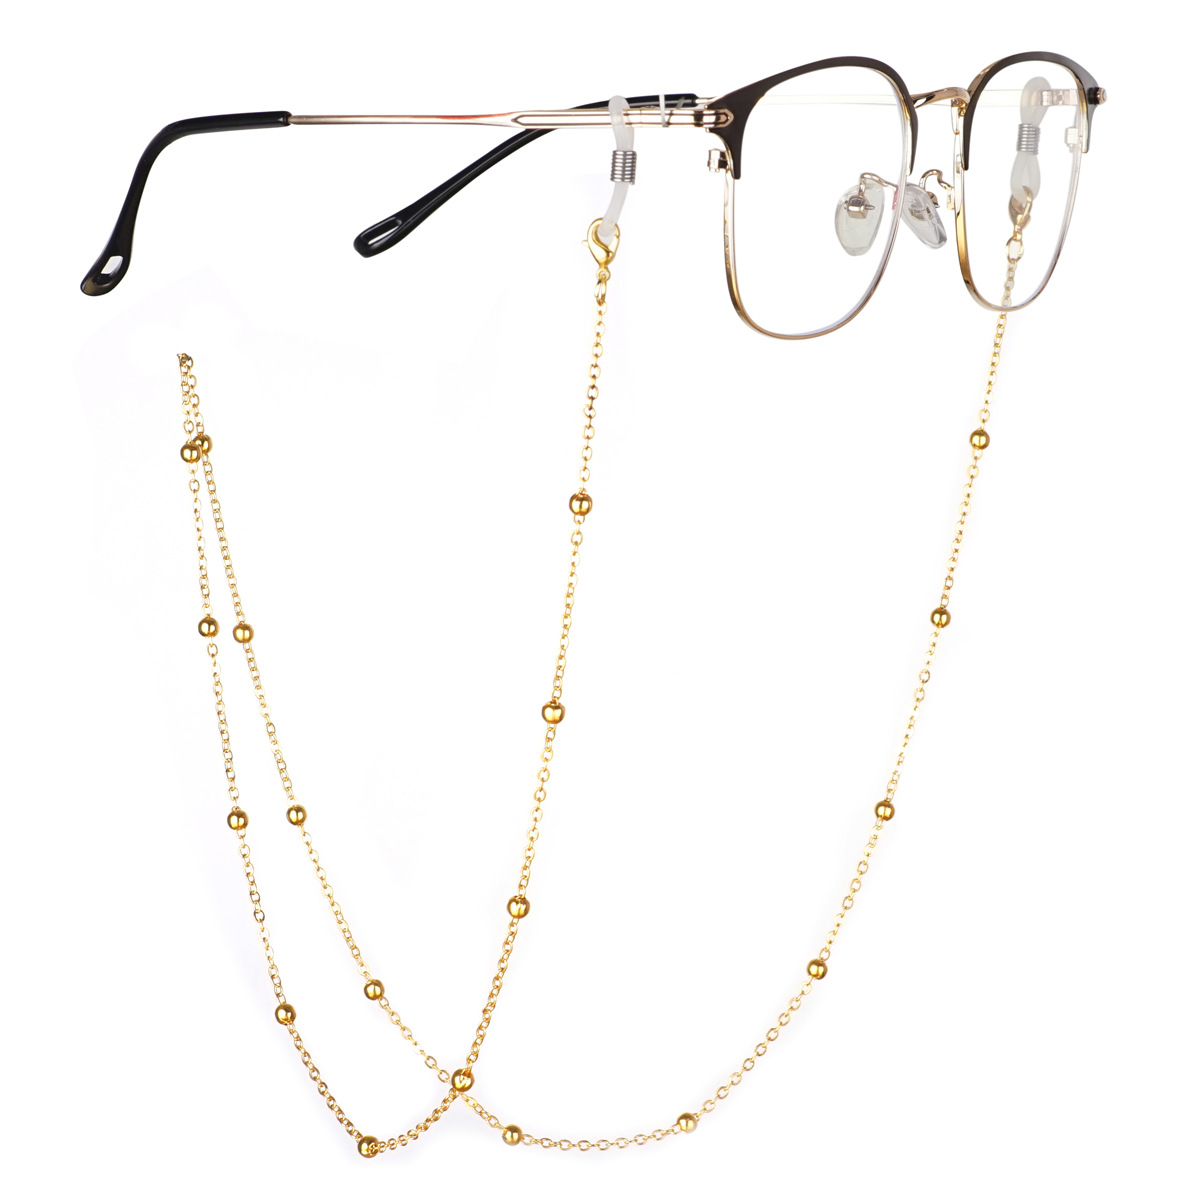 Plastic Eyeglass Chains -Small Links With Ring in Center - Eyeglass Chains  - Eyewear Accessories